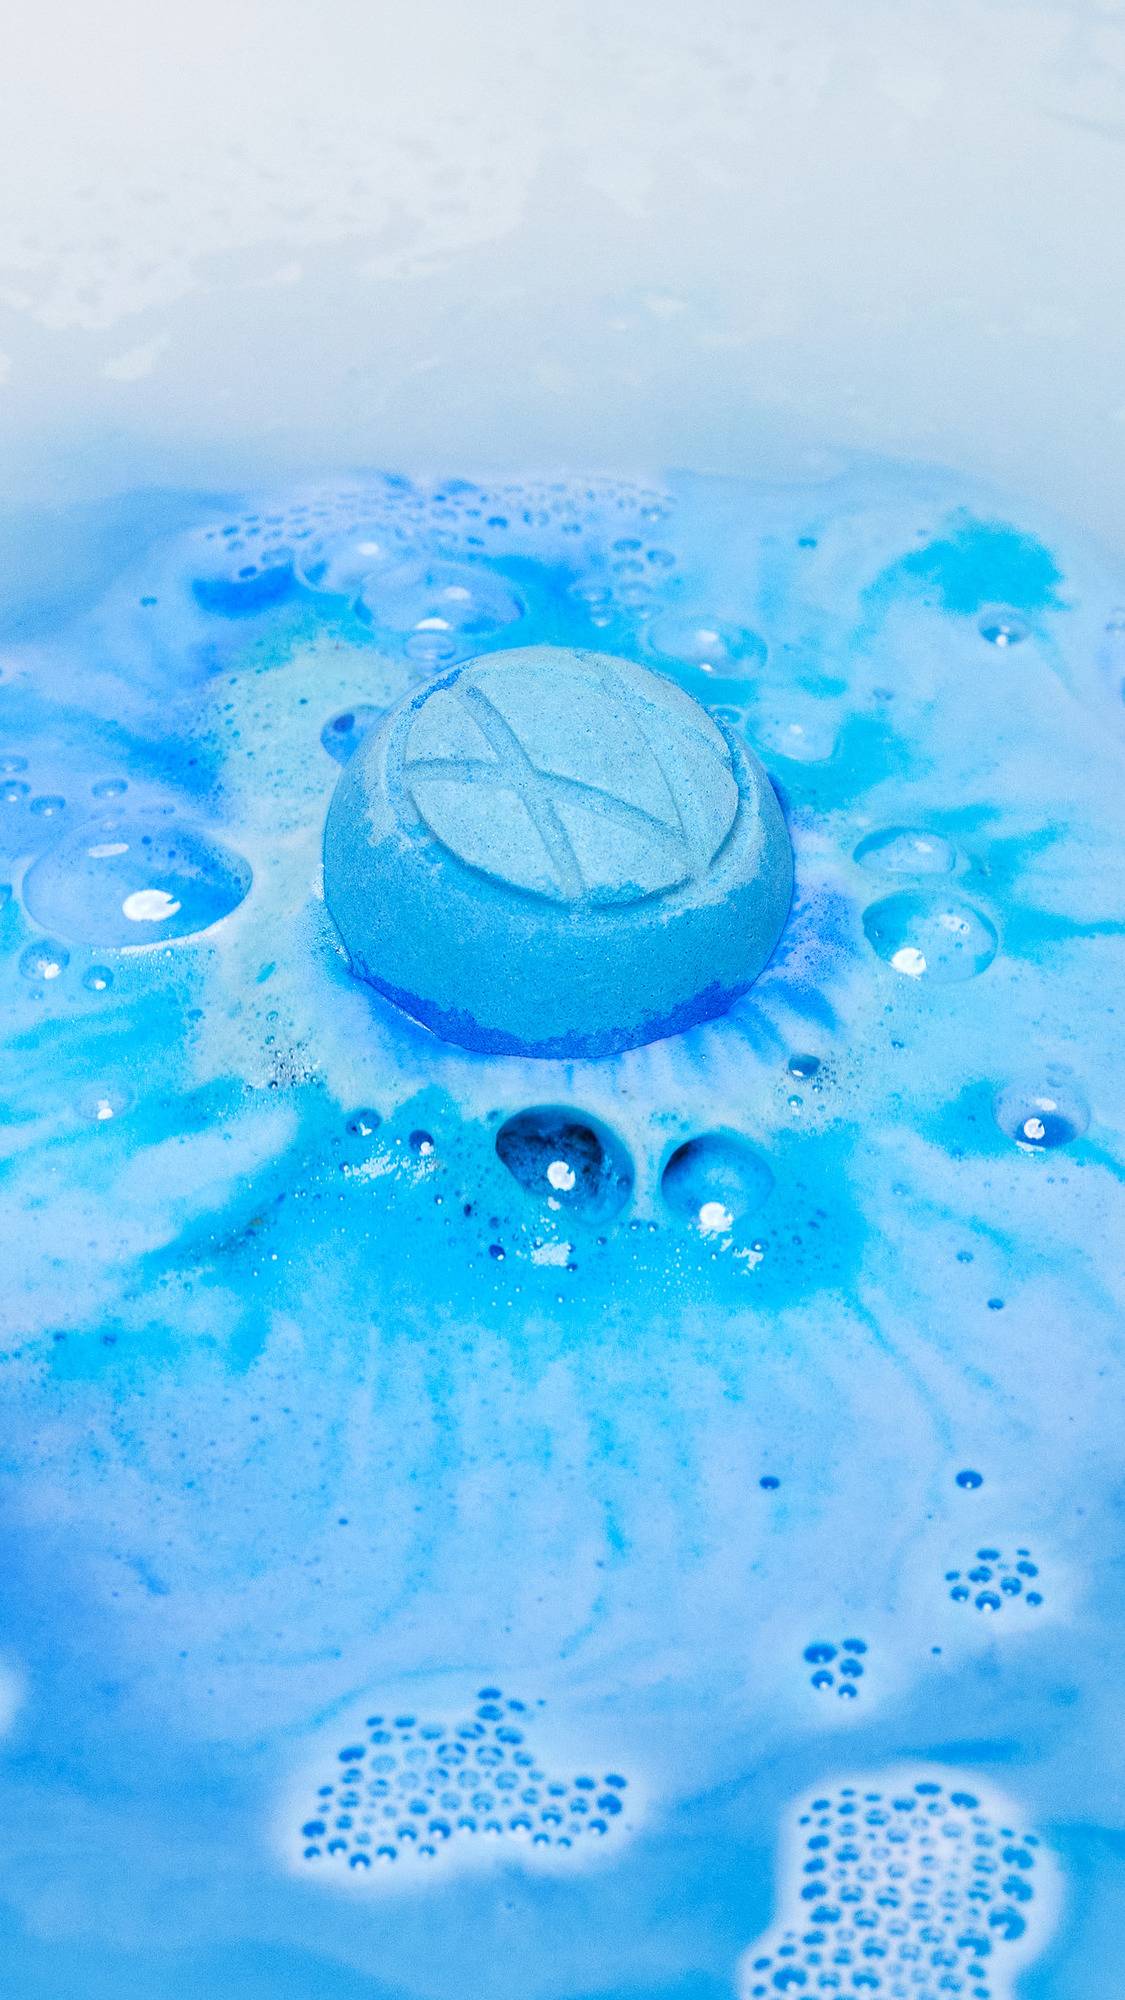 The Hexagon bath bomb has just been placed into the bath water and is giving off a thick foamy layer of blue swirls. 